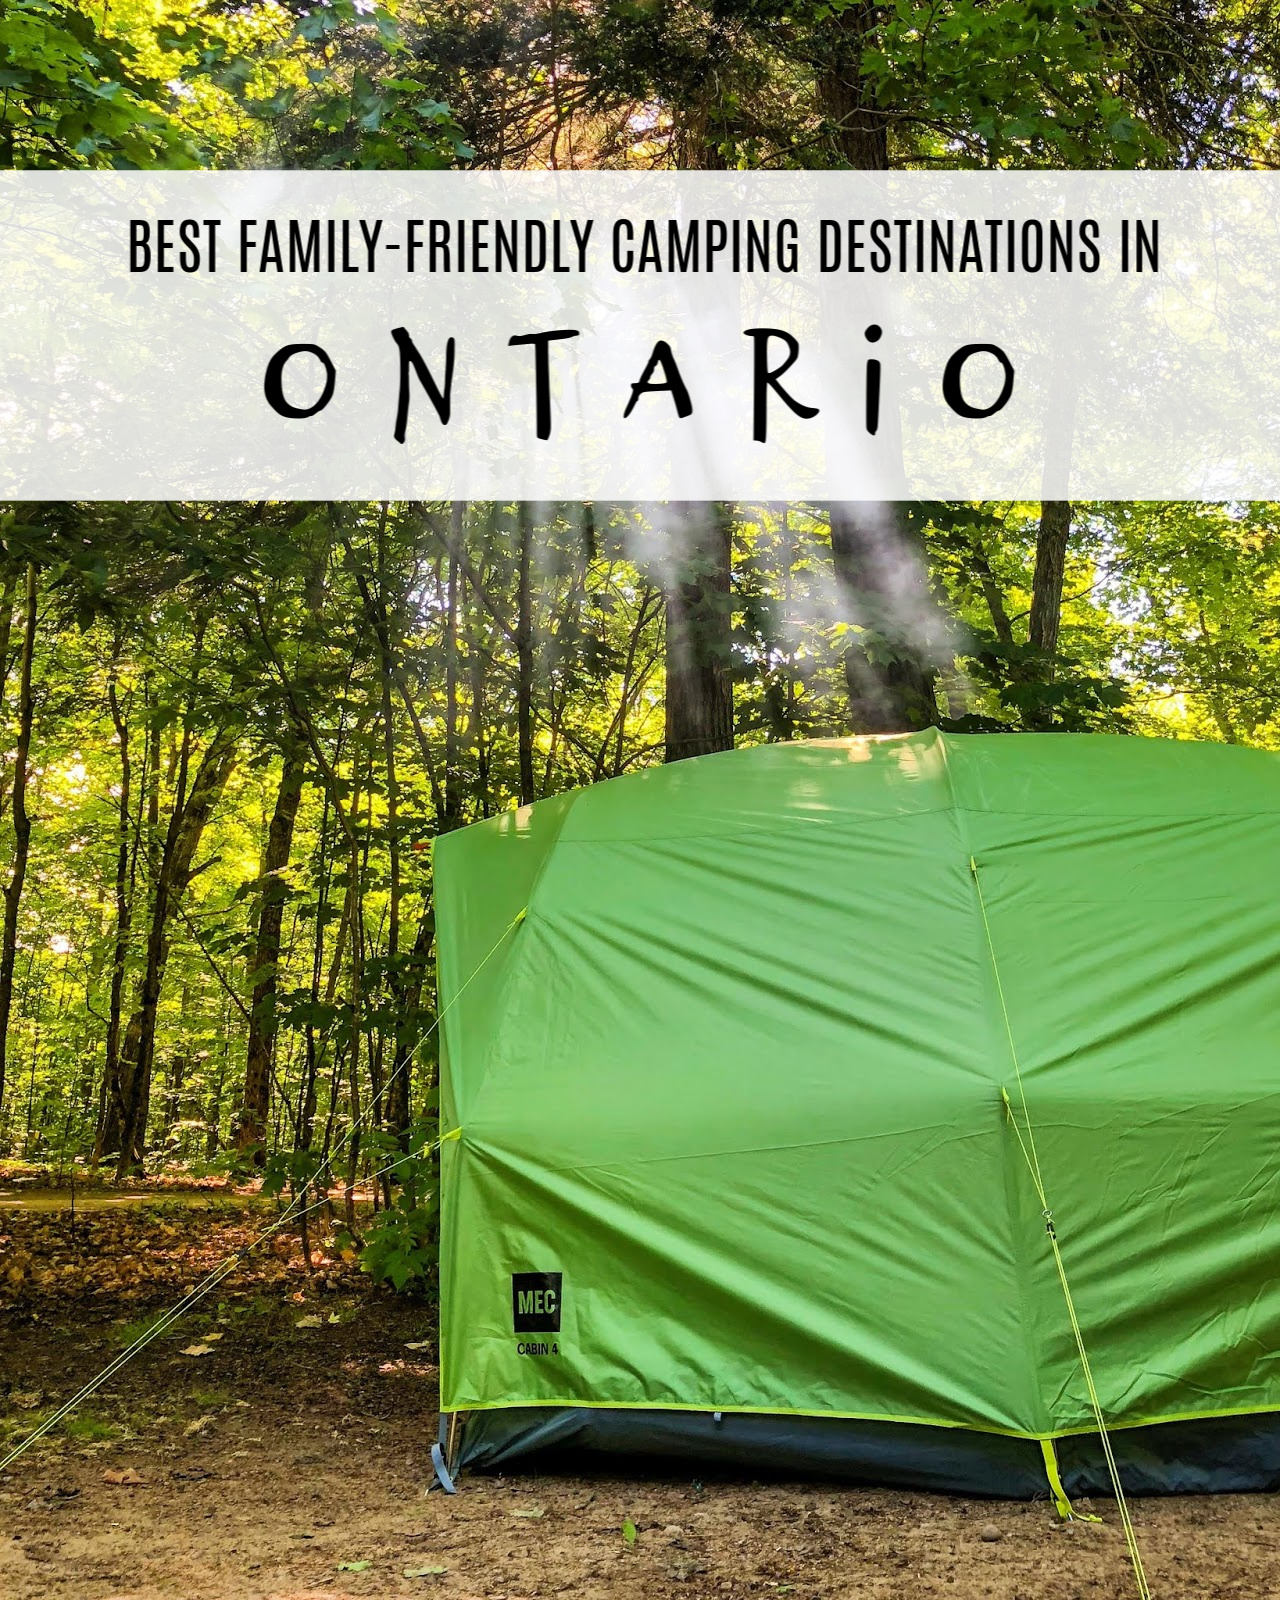 Best Family-Friendly Camping Destinations in Ontario